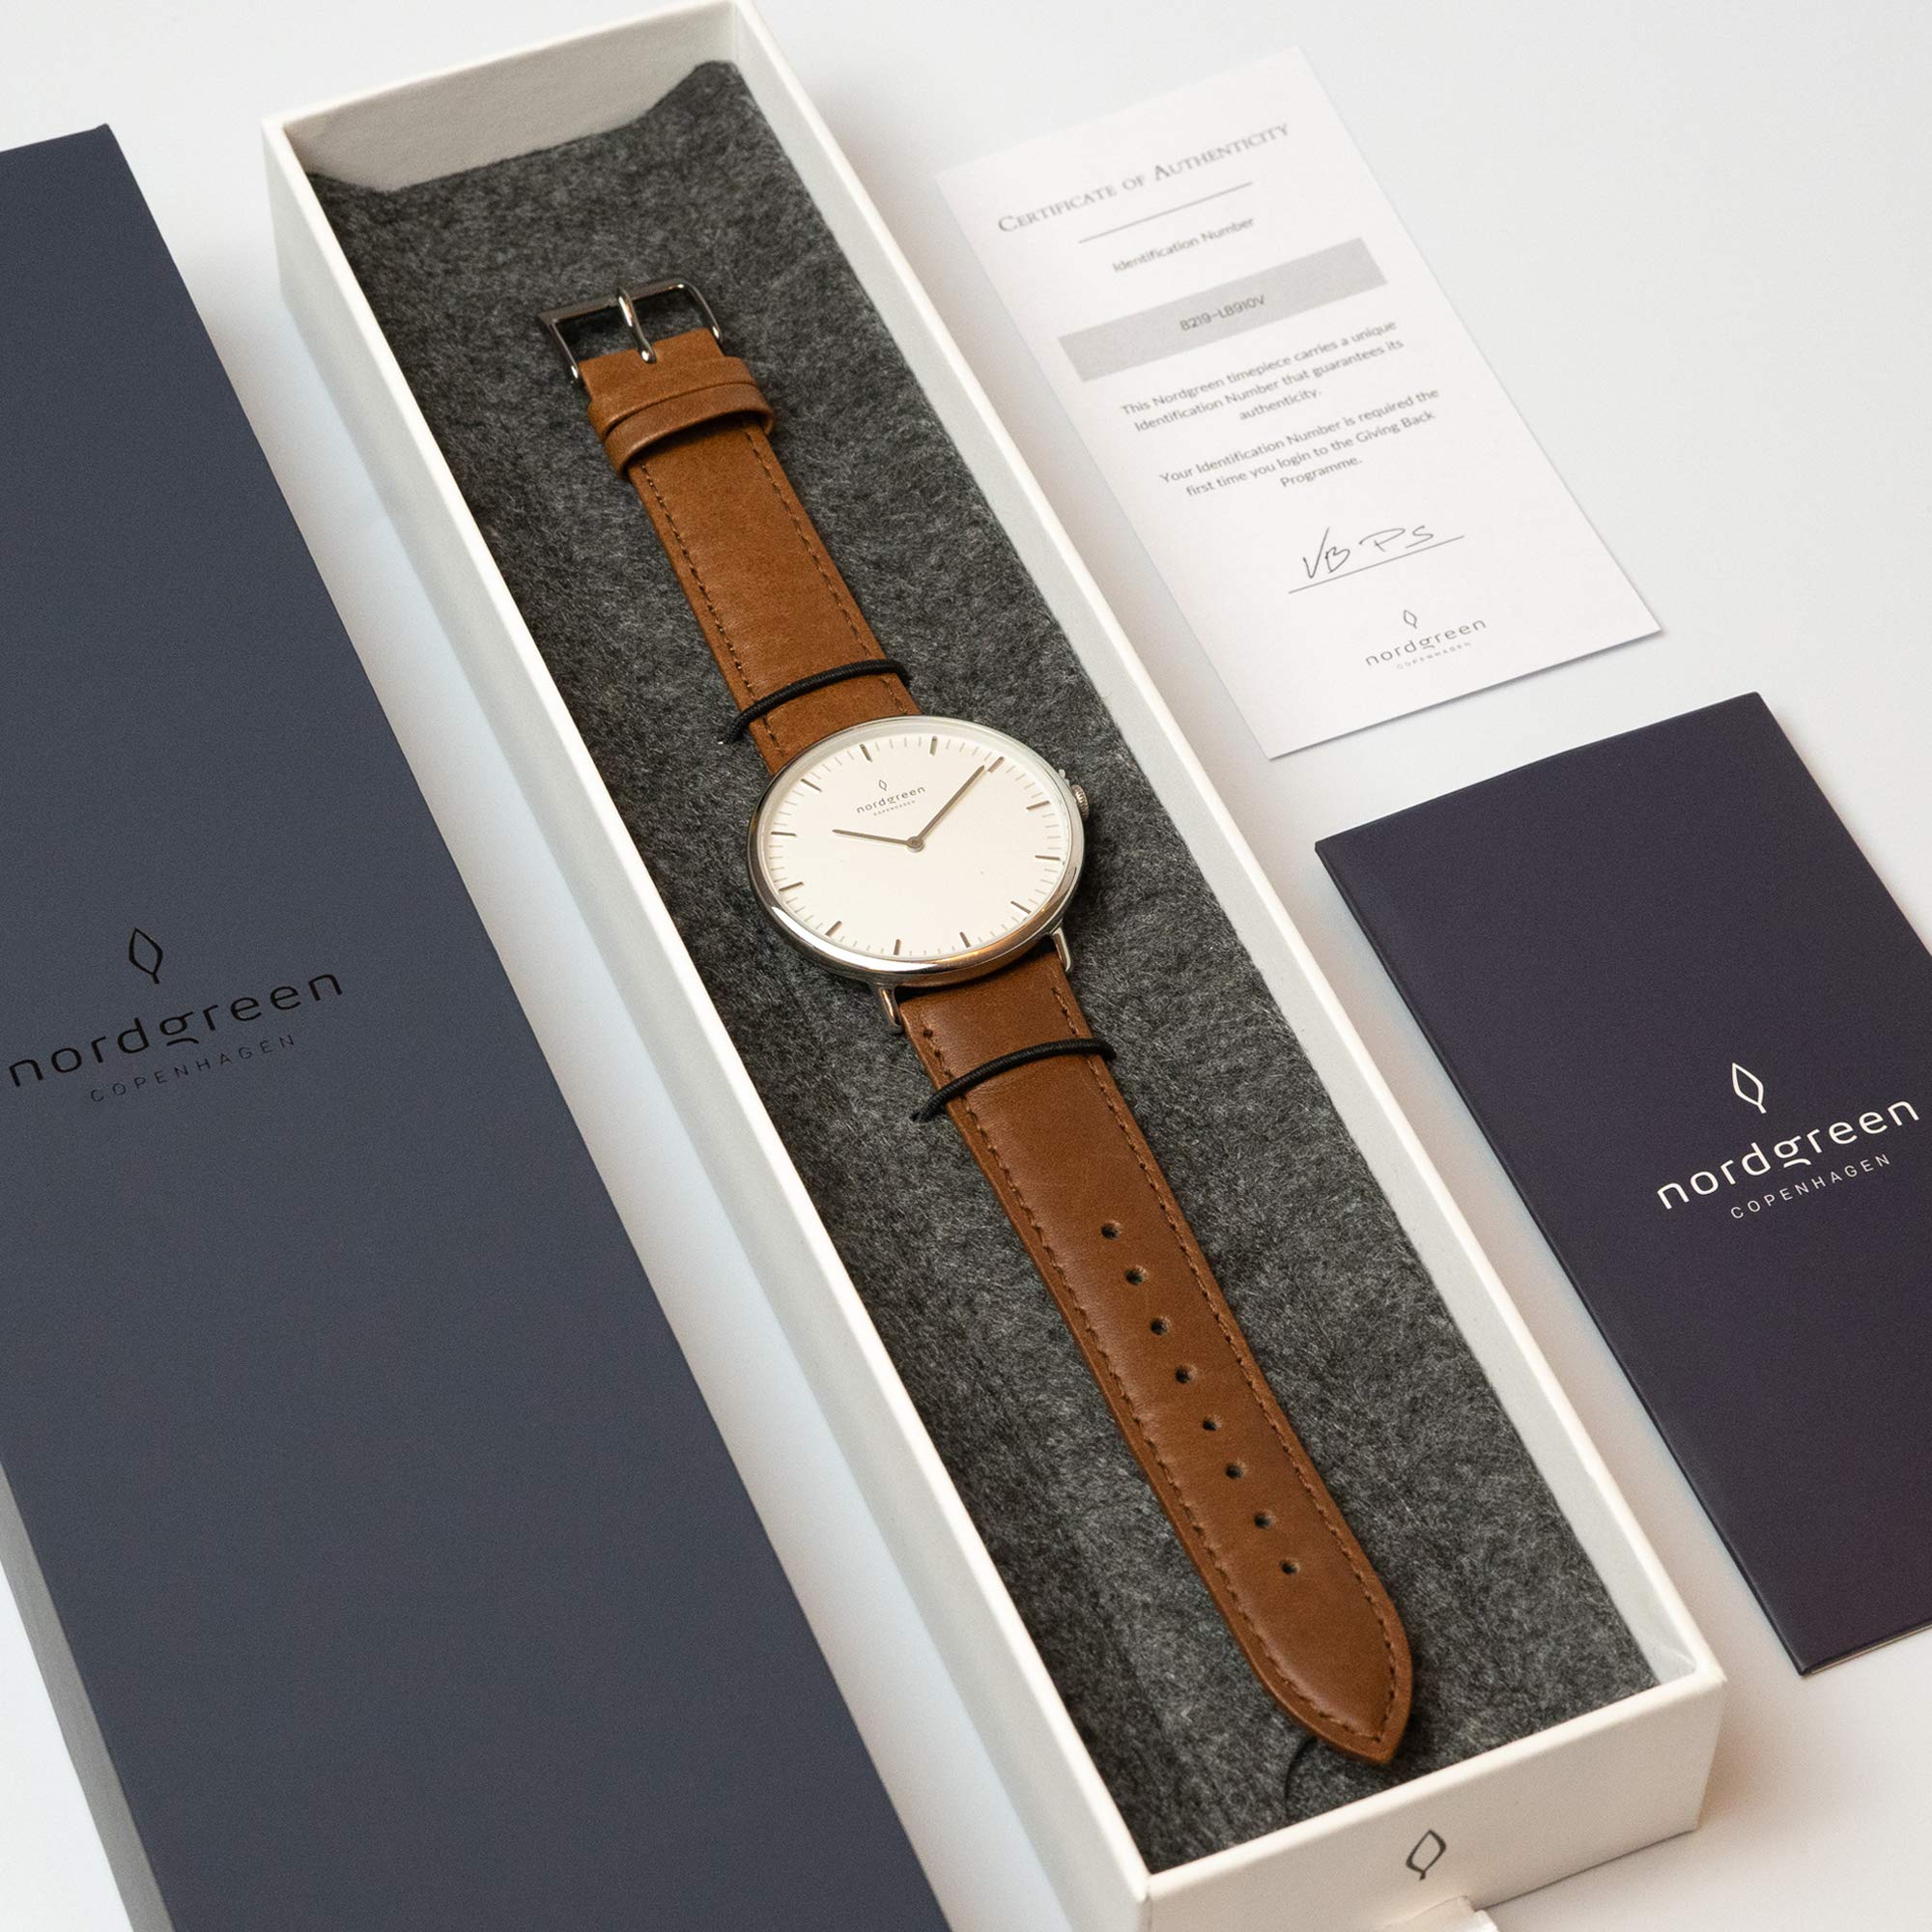 Nordgreen Native Scandinavian Rose Gold Watch with Interchangeable Straps